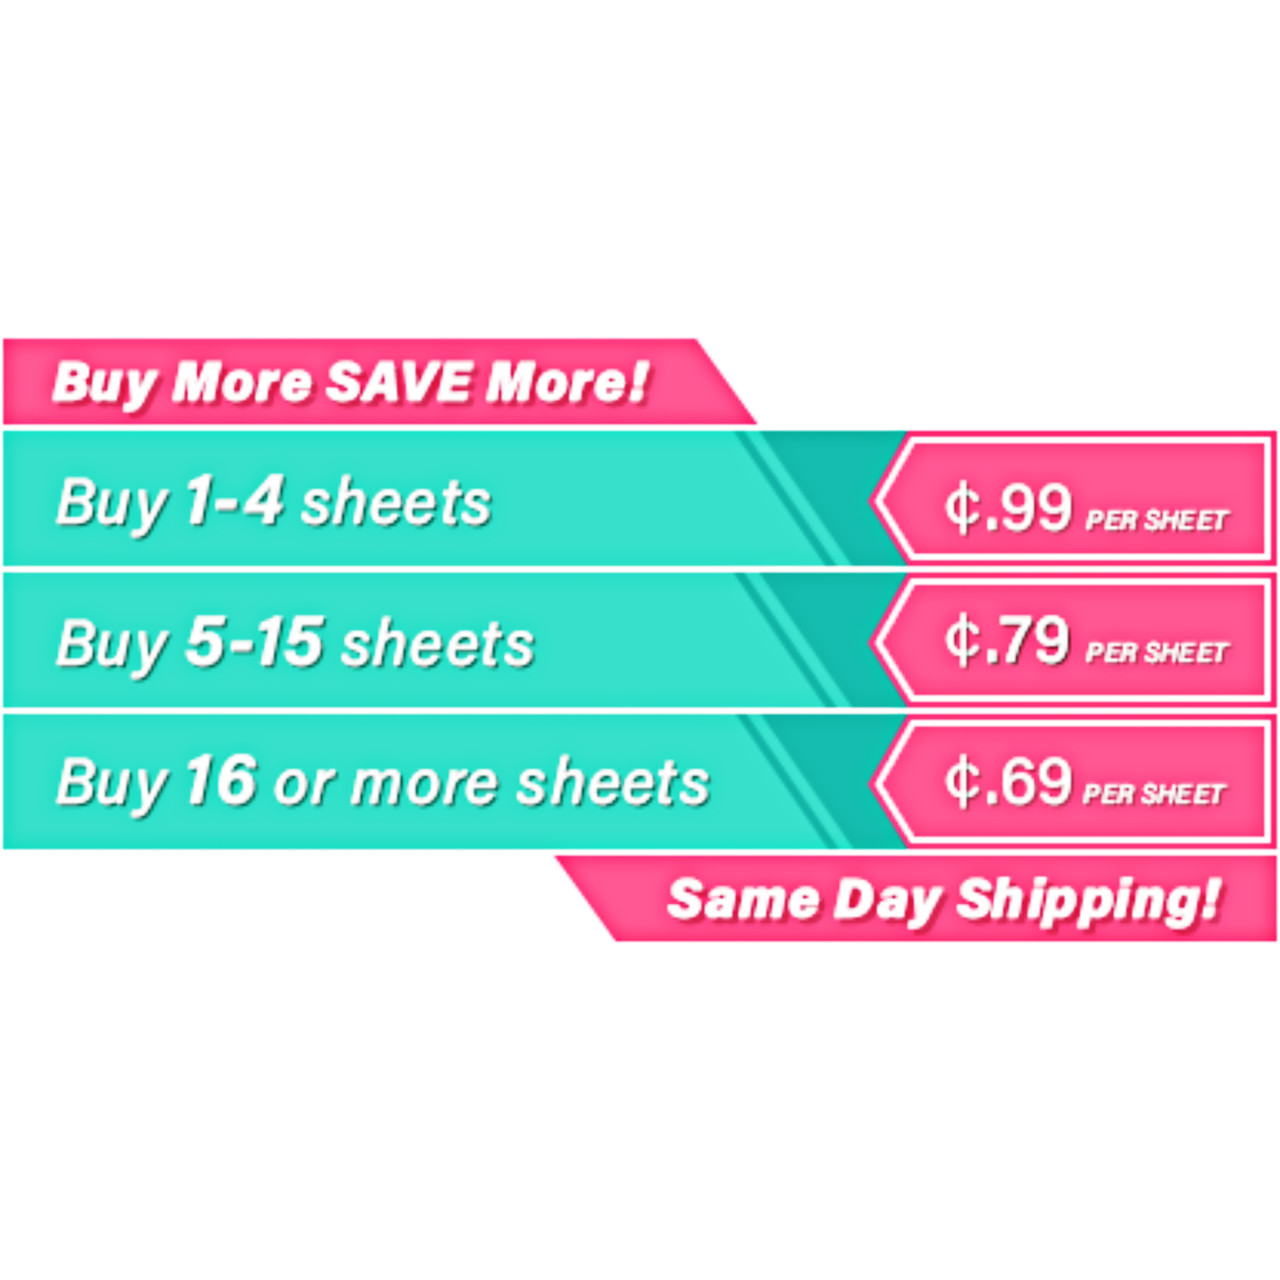 Oracal 651 12x12 Sheets - Only 65¢ Each!